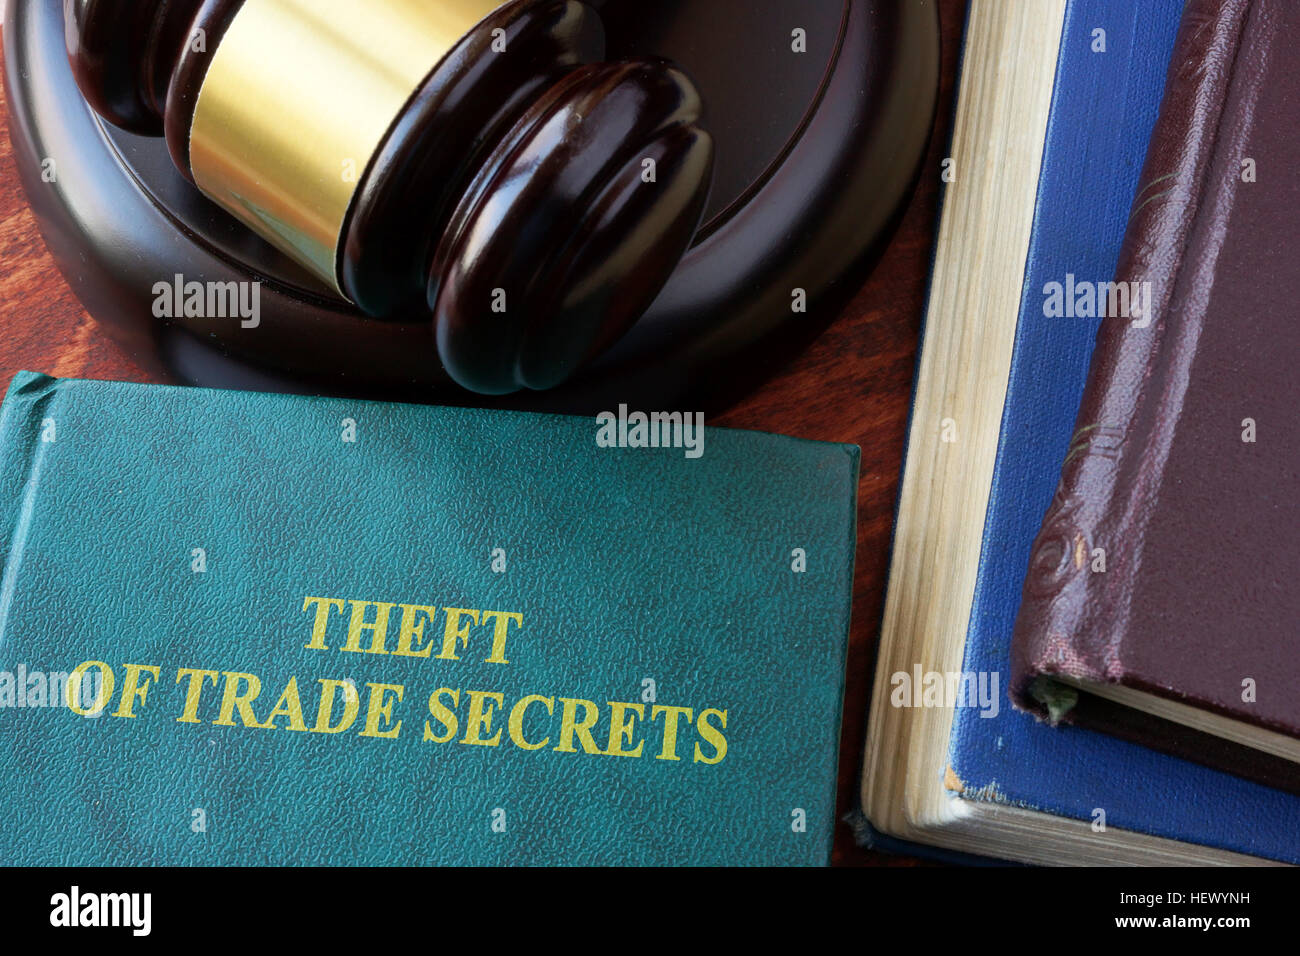 Theft of Trade Secrets title on a book and gavel. Stock Photo